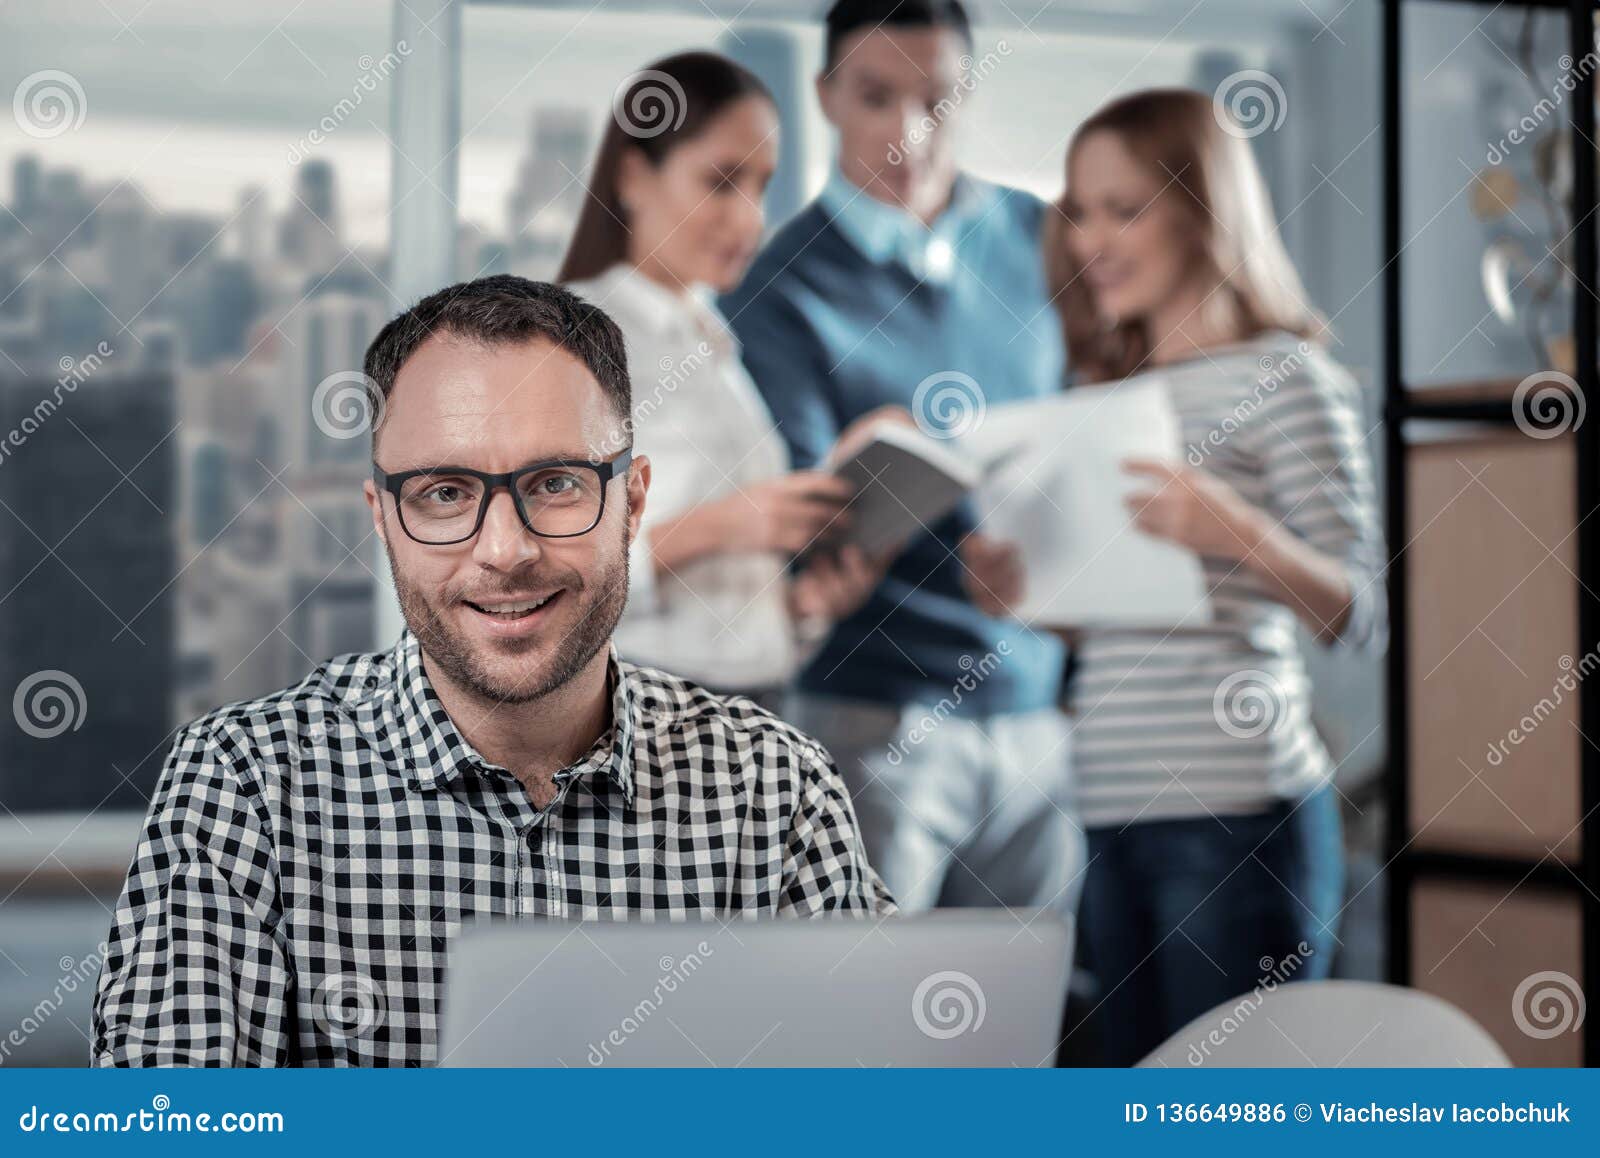 Pleased Man Working On His Laptop At Work Stock Photo - Image of ...